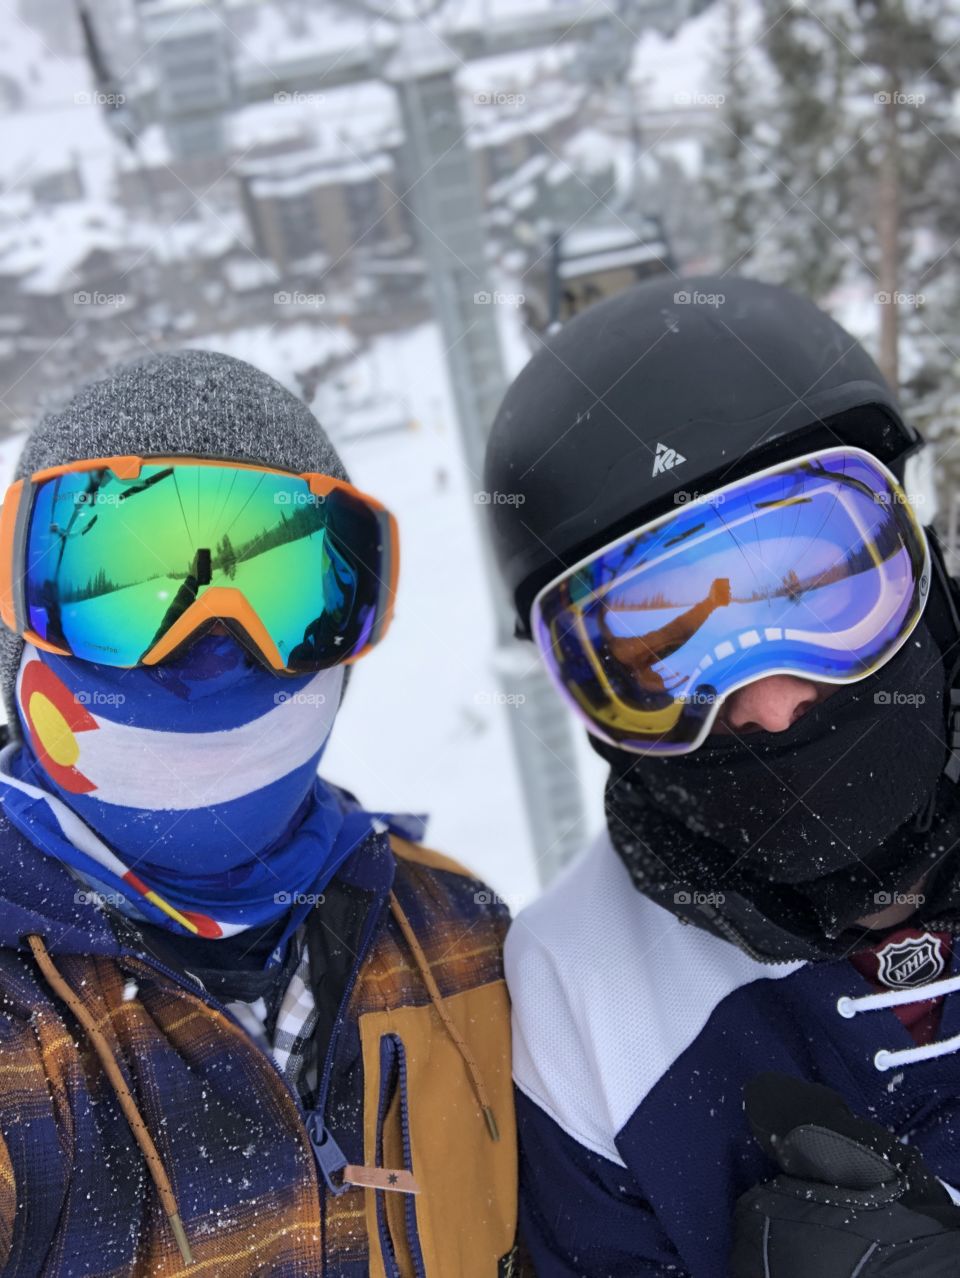 My brother and I heading up to the slopes at Copper Mountain!